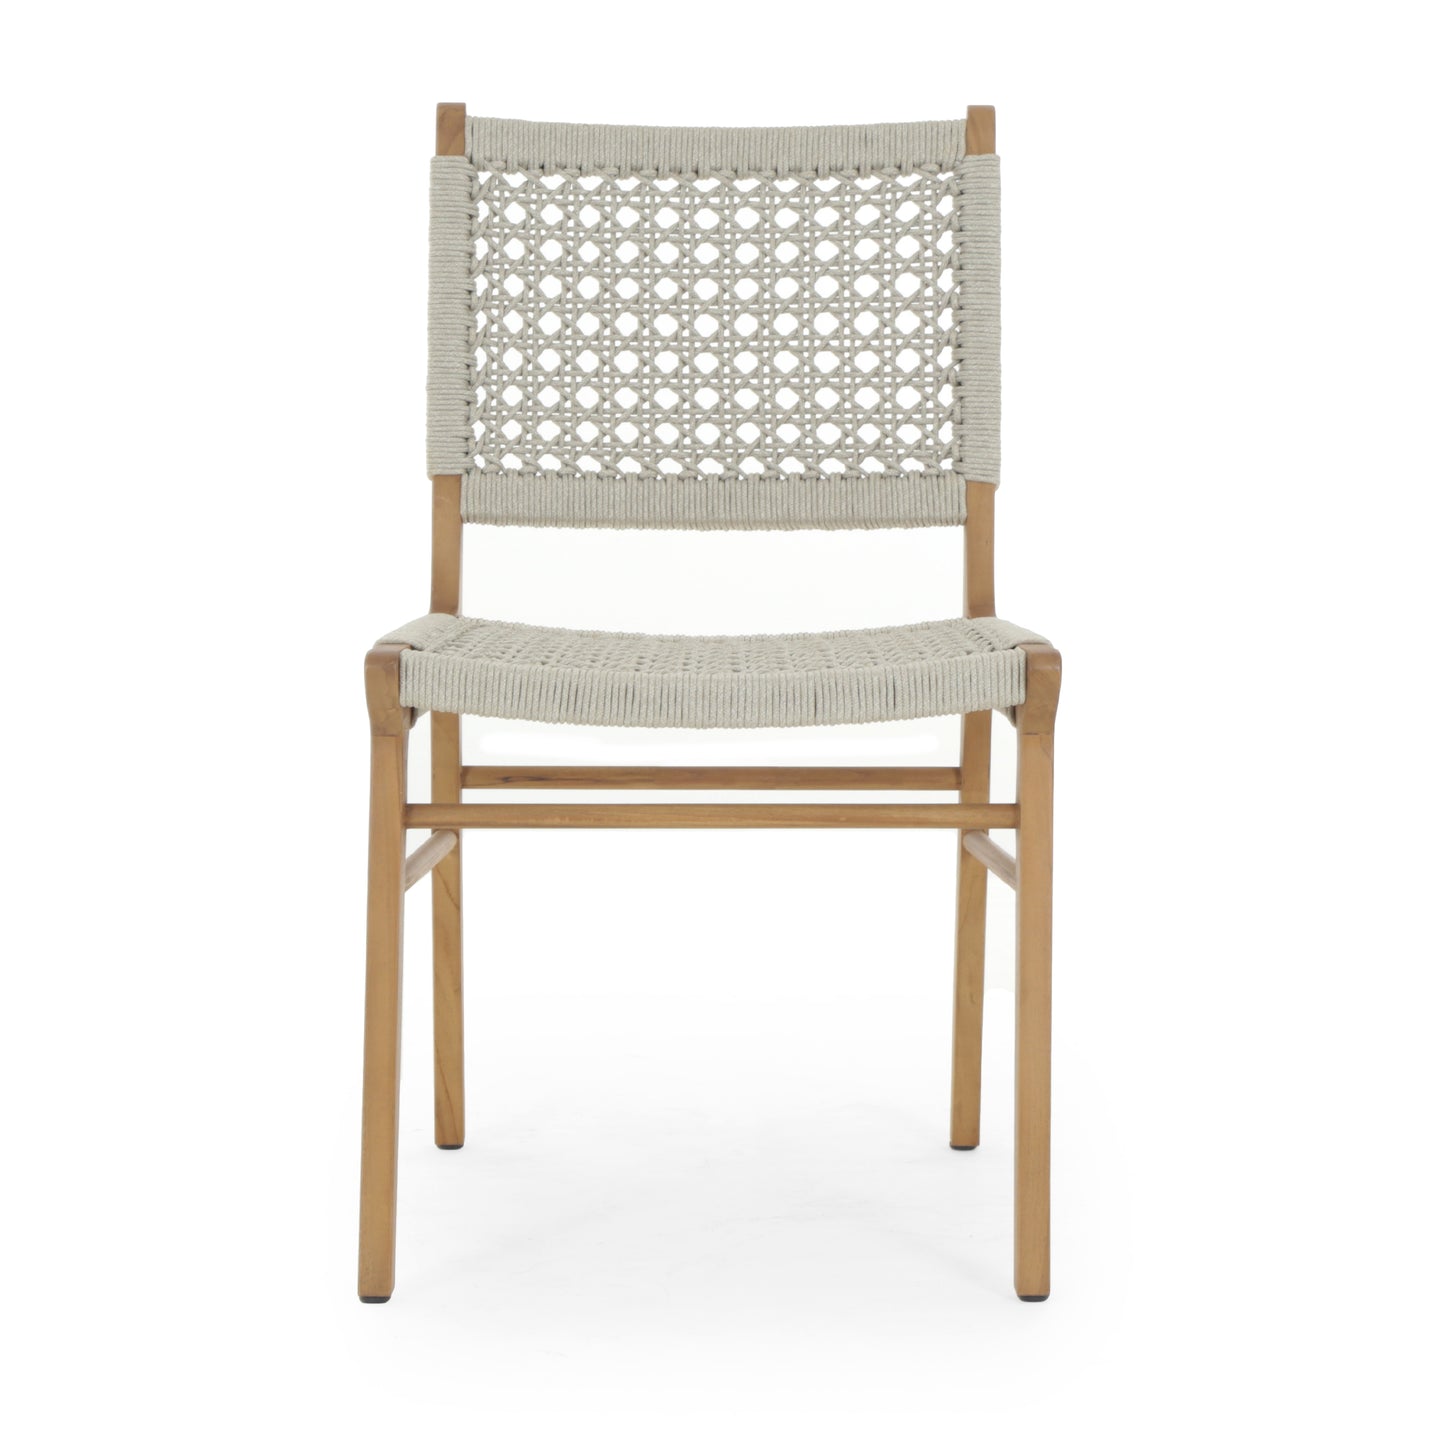 Delmar Outdoor Dining Chair Outdoor Chairs Four Hands     Four Hands, Mid Century Modern Furniture, Old Bones Furniture Company, Old Bones Co, Modern Mid Century, Designer Furniture, https://www.oldbonesco.com/